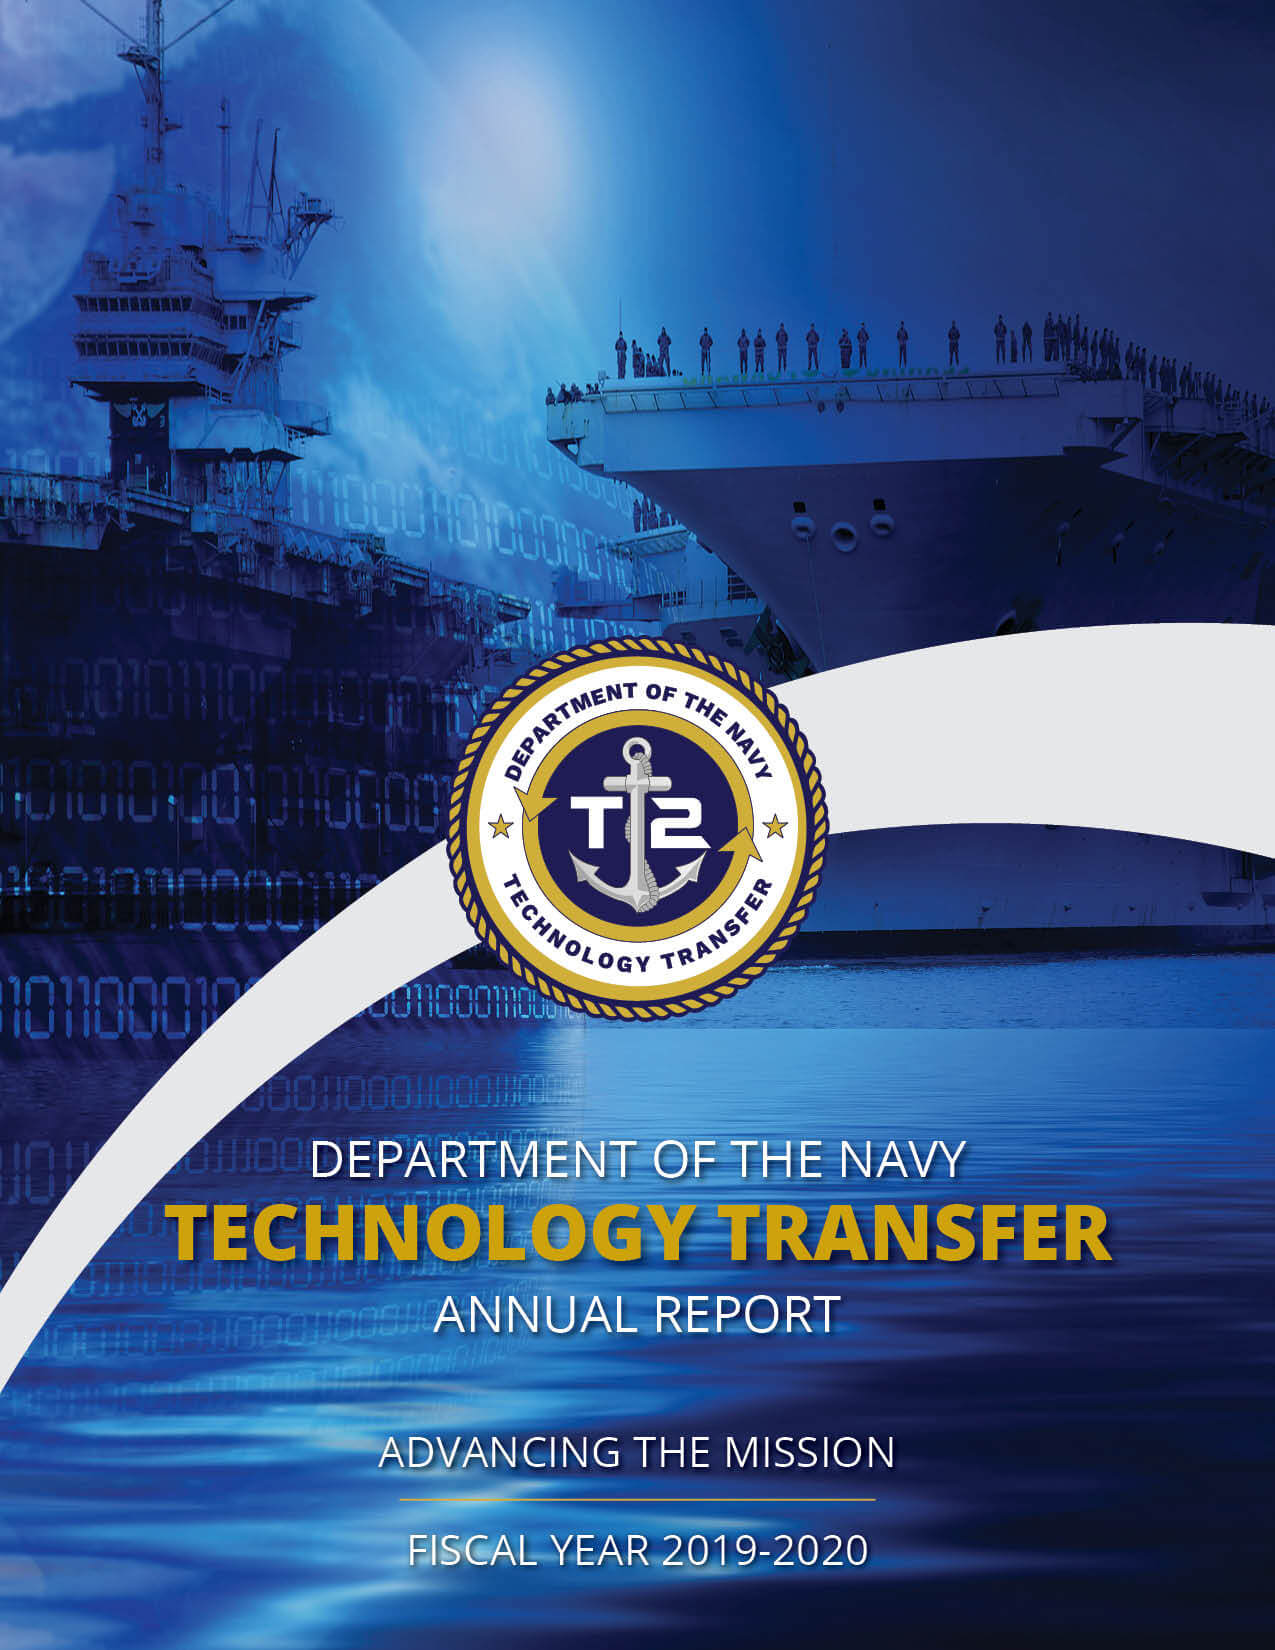 FY19-FY20 - Annual Report